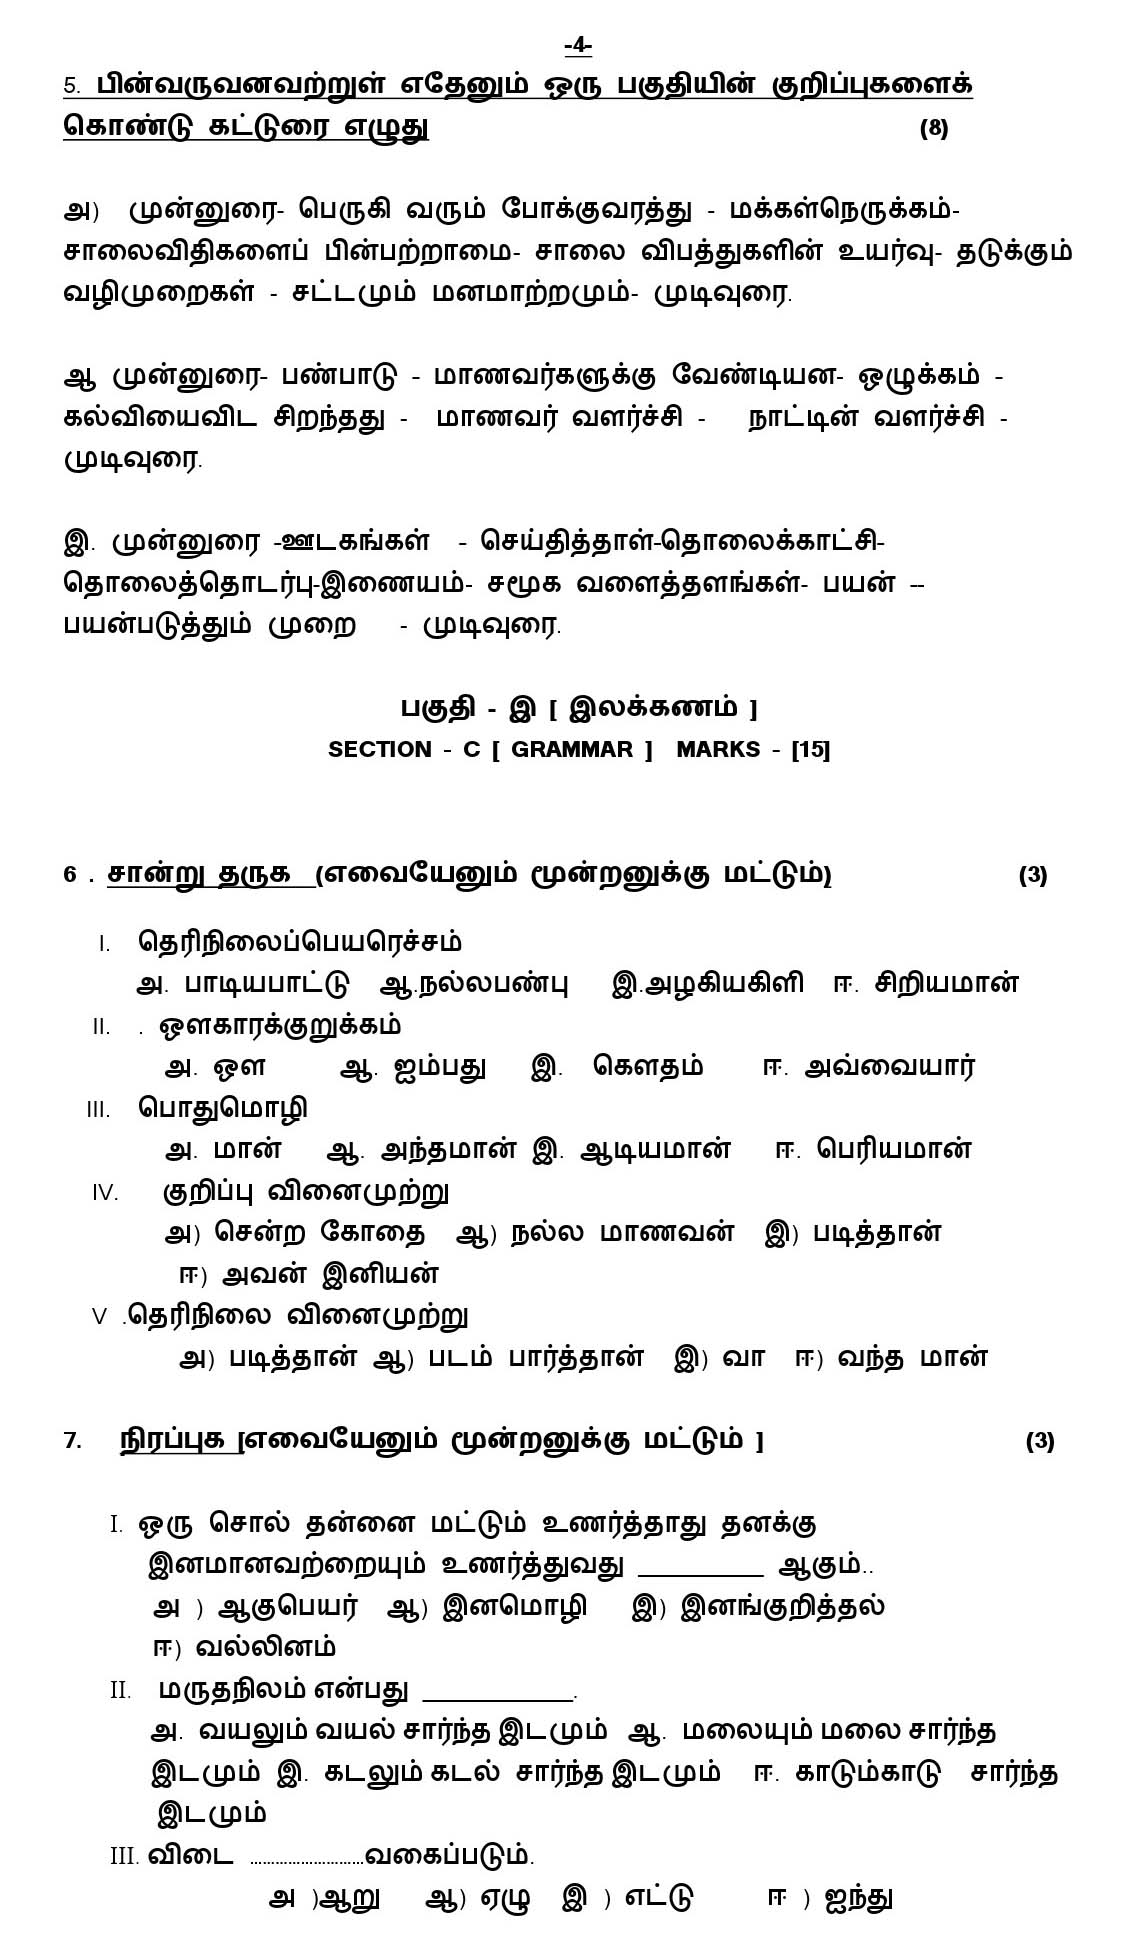 Tamil CBSE Class X Sample Question Paper 2018-19 - Image 4